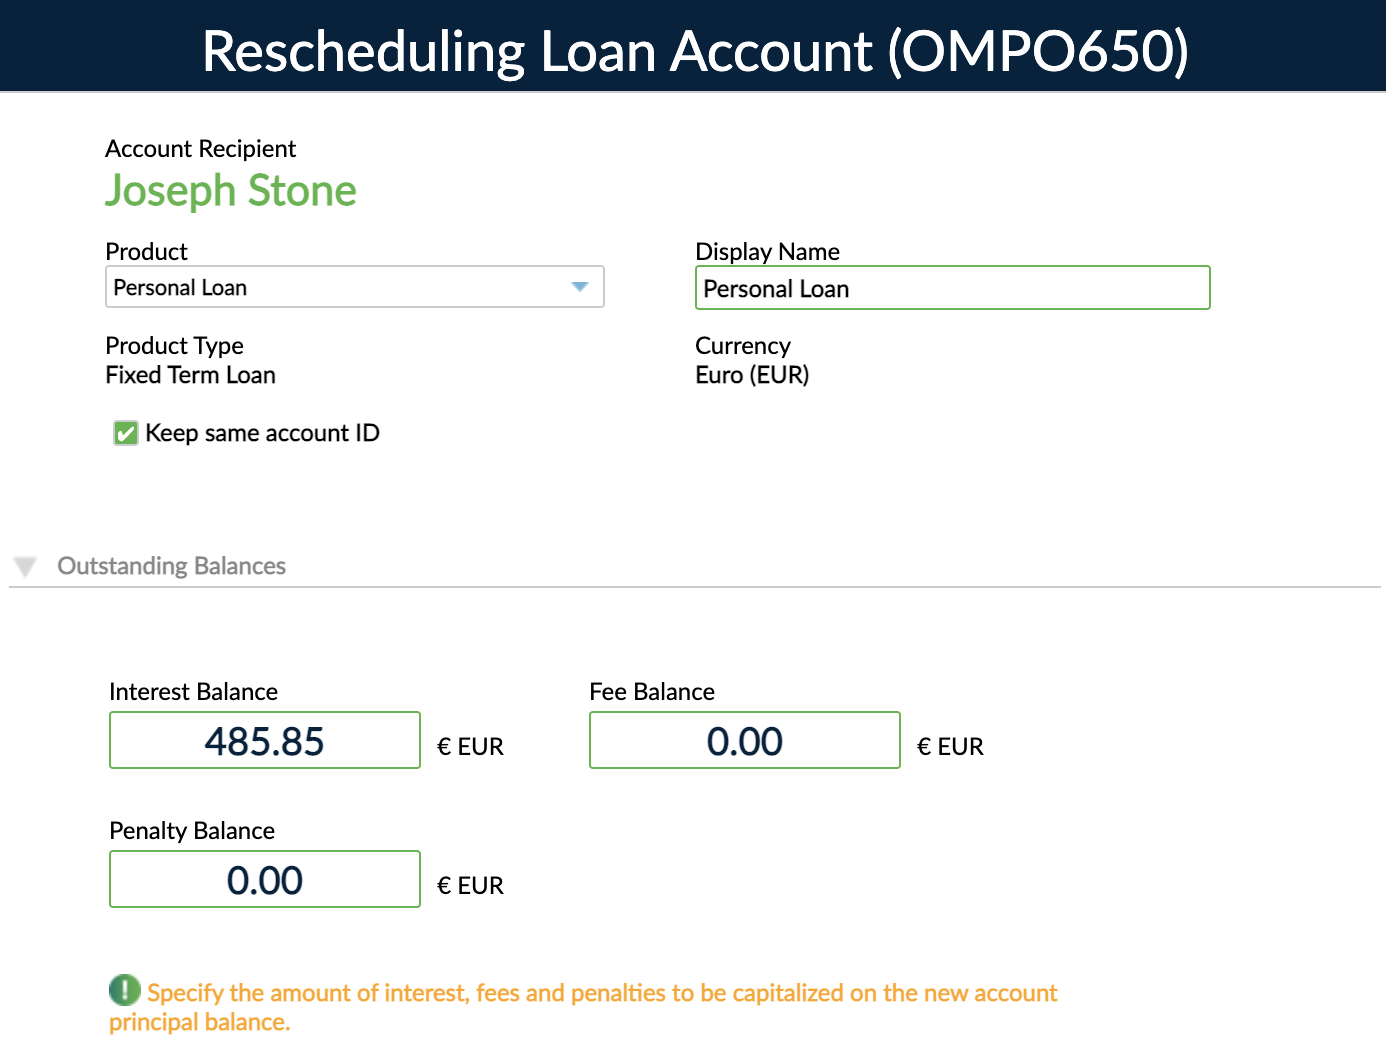 Rescheduling loans form with focus on the outstanding balances